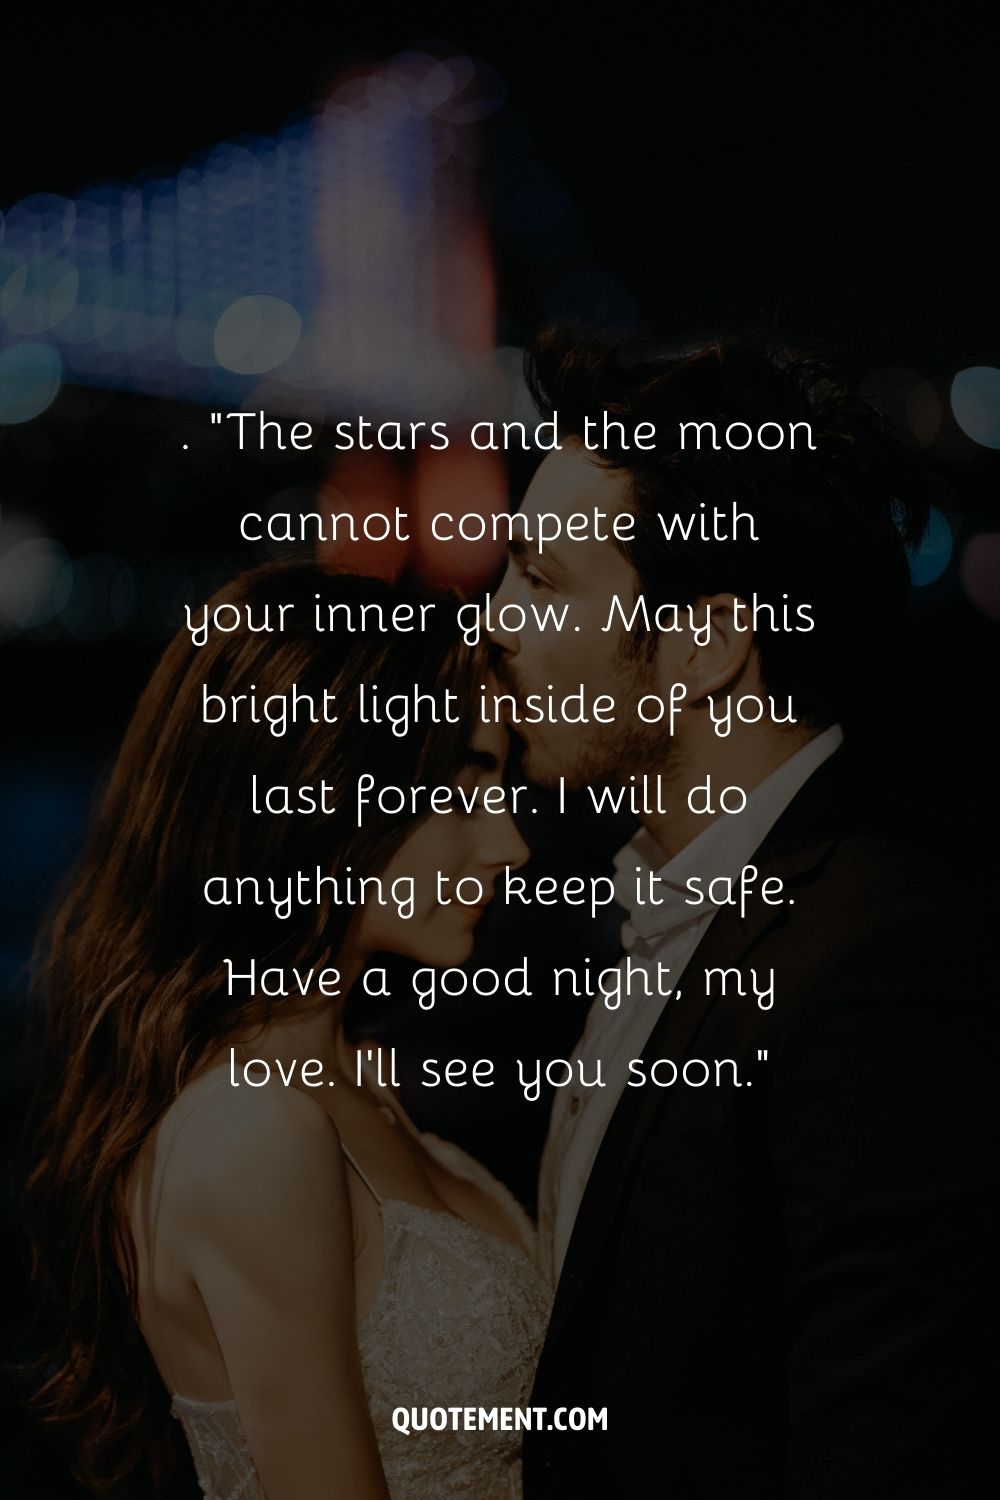 A couple close together at night, with illuminated city lights providing a soft backdrop